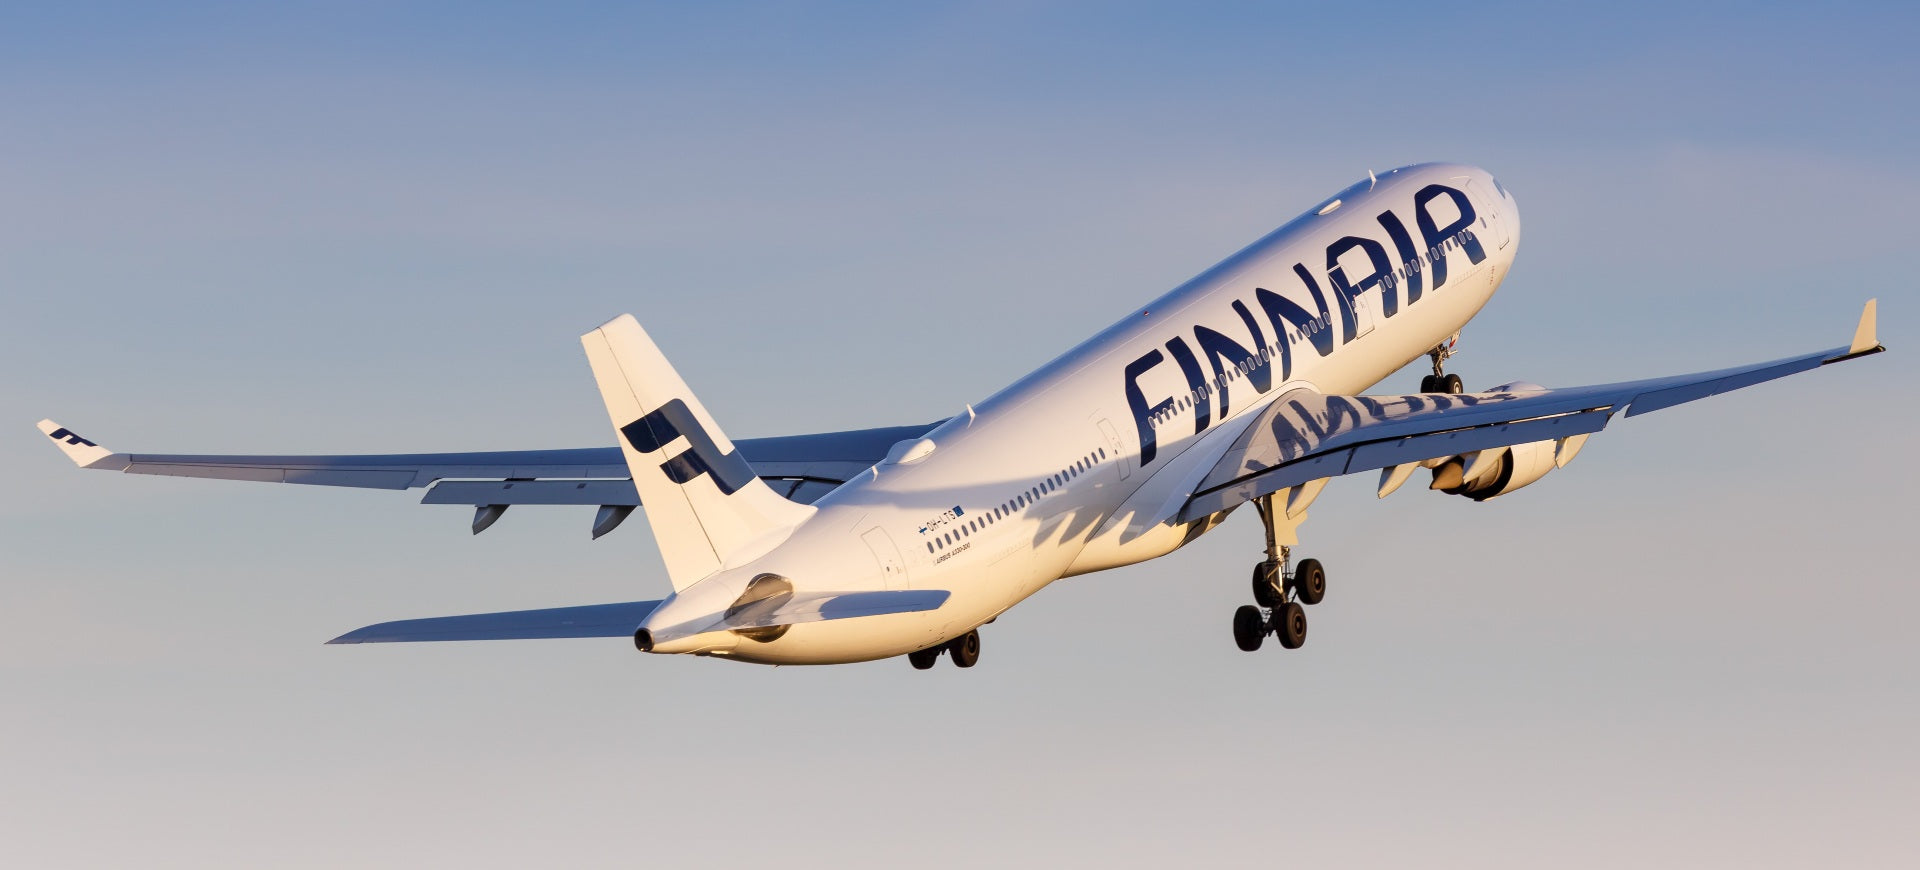 Finnair Brings More Choice To Customers Introduces Business Light Tic